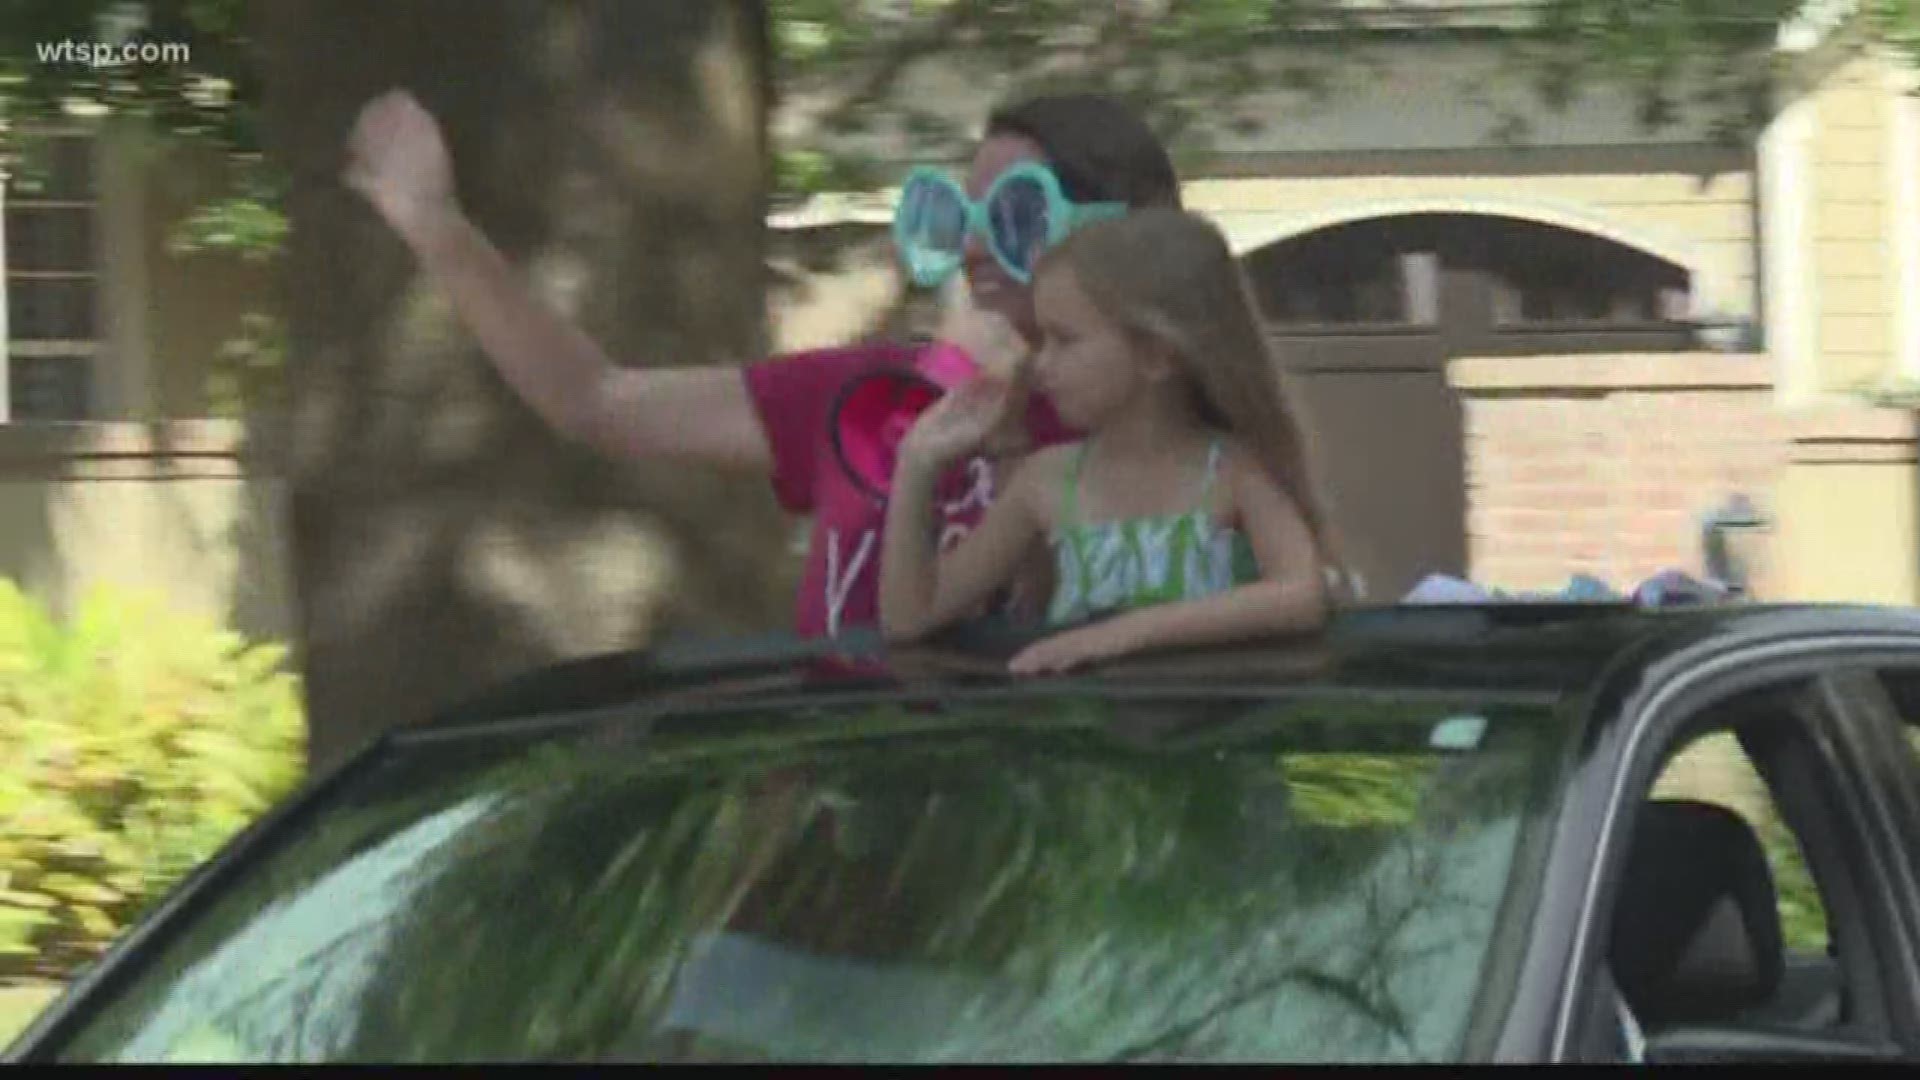 To kick off distance learning, Southside Elementary teachers waved to students and their families in a car parade.